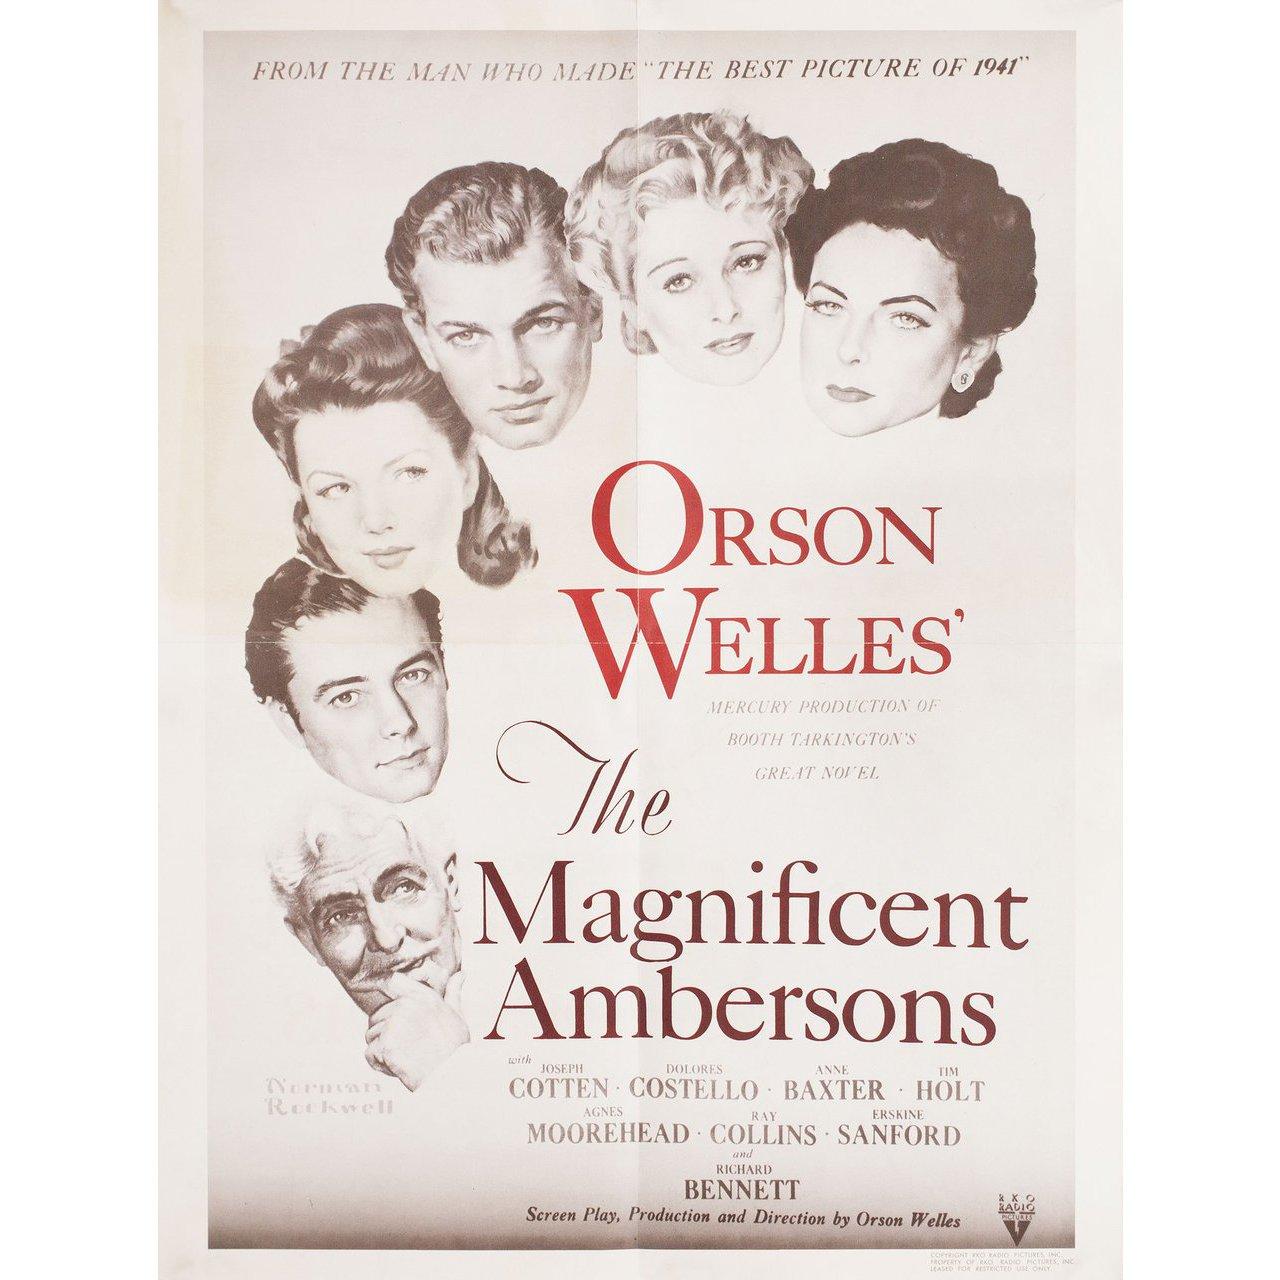 Original 1960s re-release U.S. poster by Norman Rockwell for the 1942 film The Magnificent Ambersons directed by Orson Welles / Fred Fleck / Robert Wise with Joseph Cotten / Dolores Costello / Anne Baxter / Tim Holt. Fine condition, folded. Many